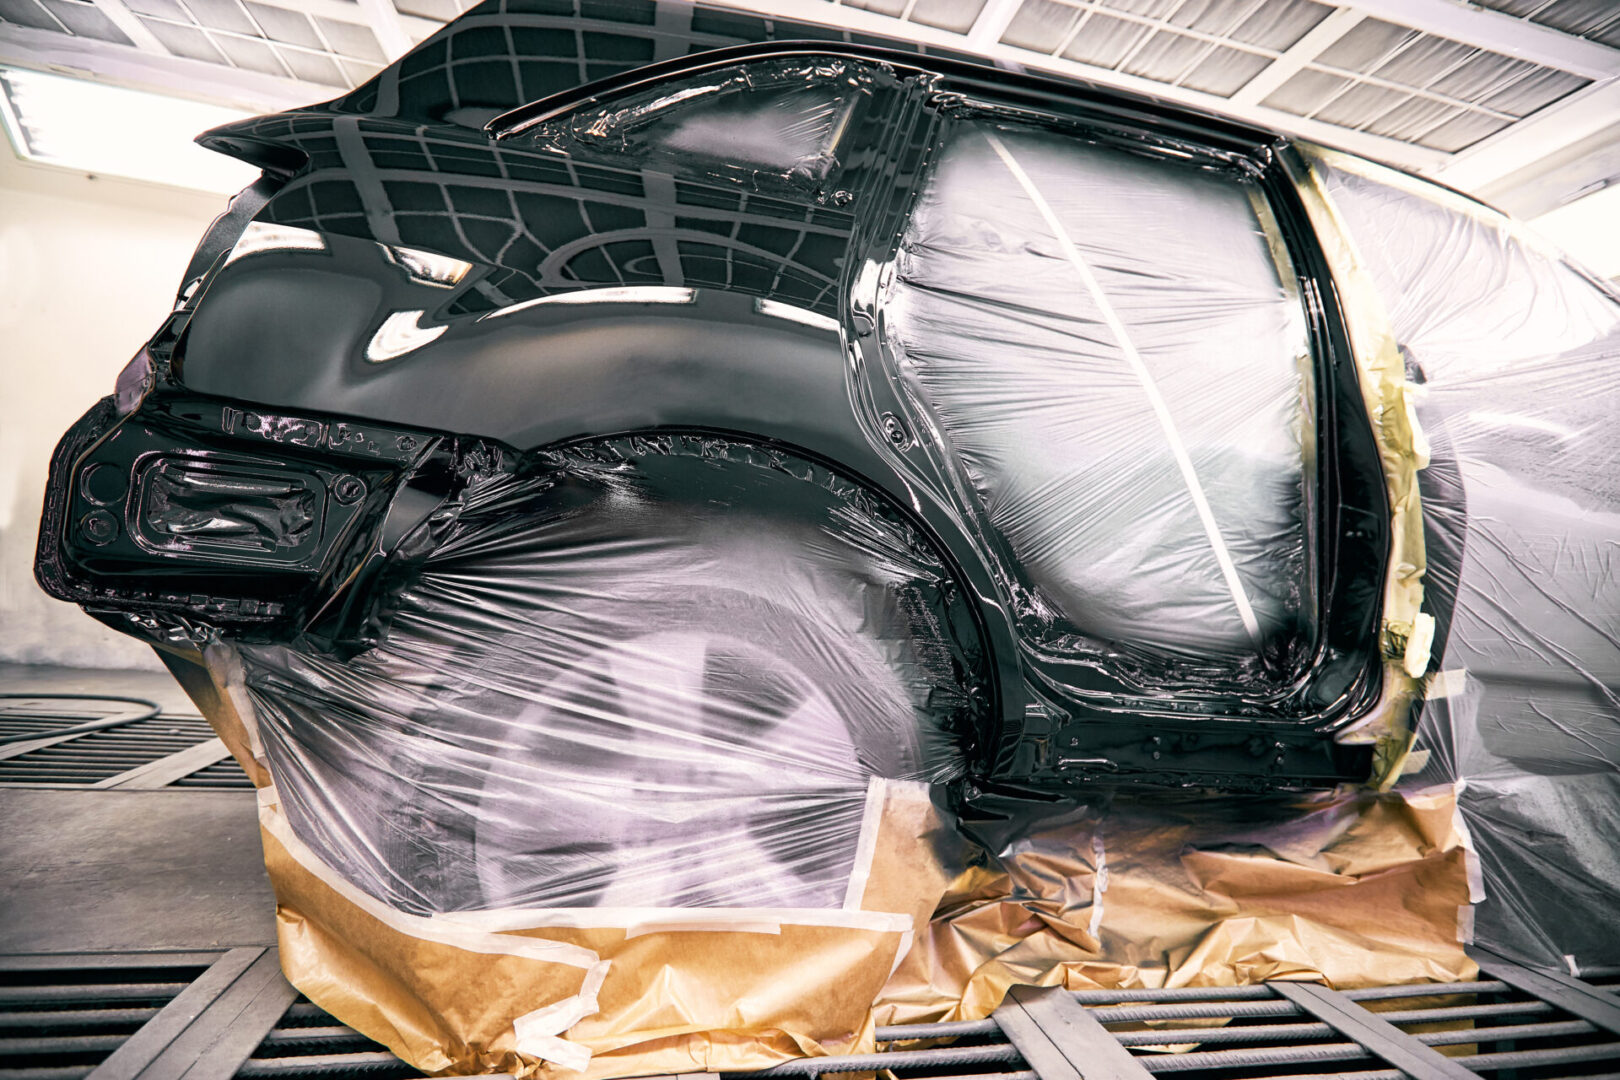 The Body of a Car Wrapped in Plastic for Repair